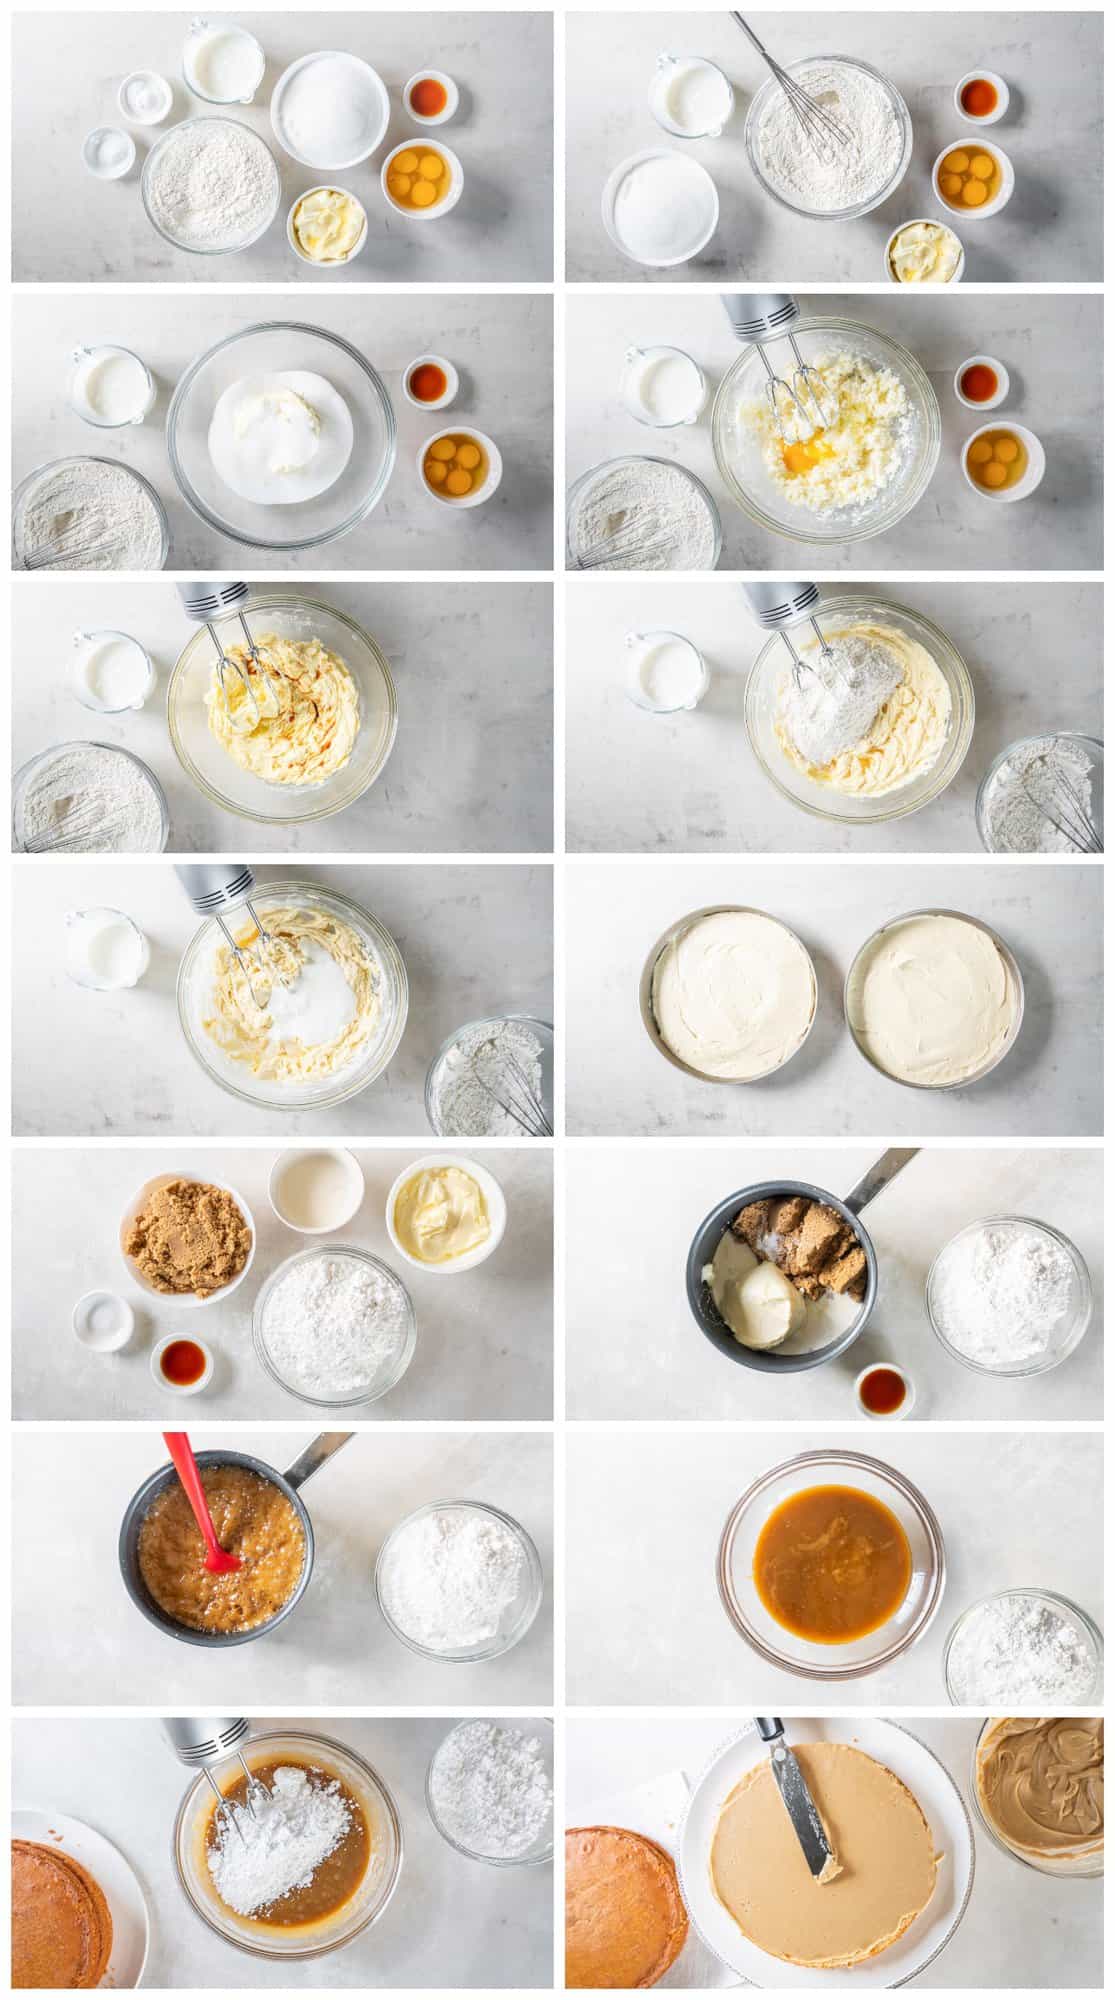 how to make a caramel cake step by step photo instructions